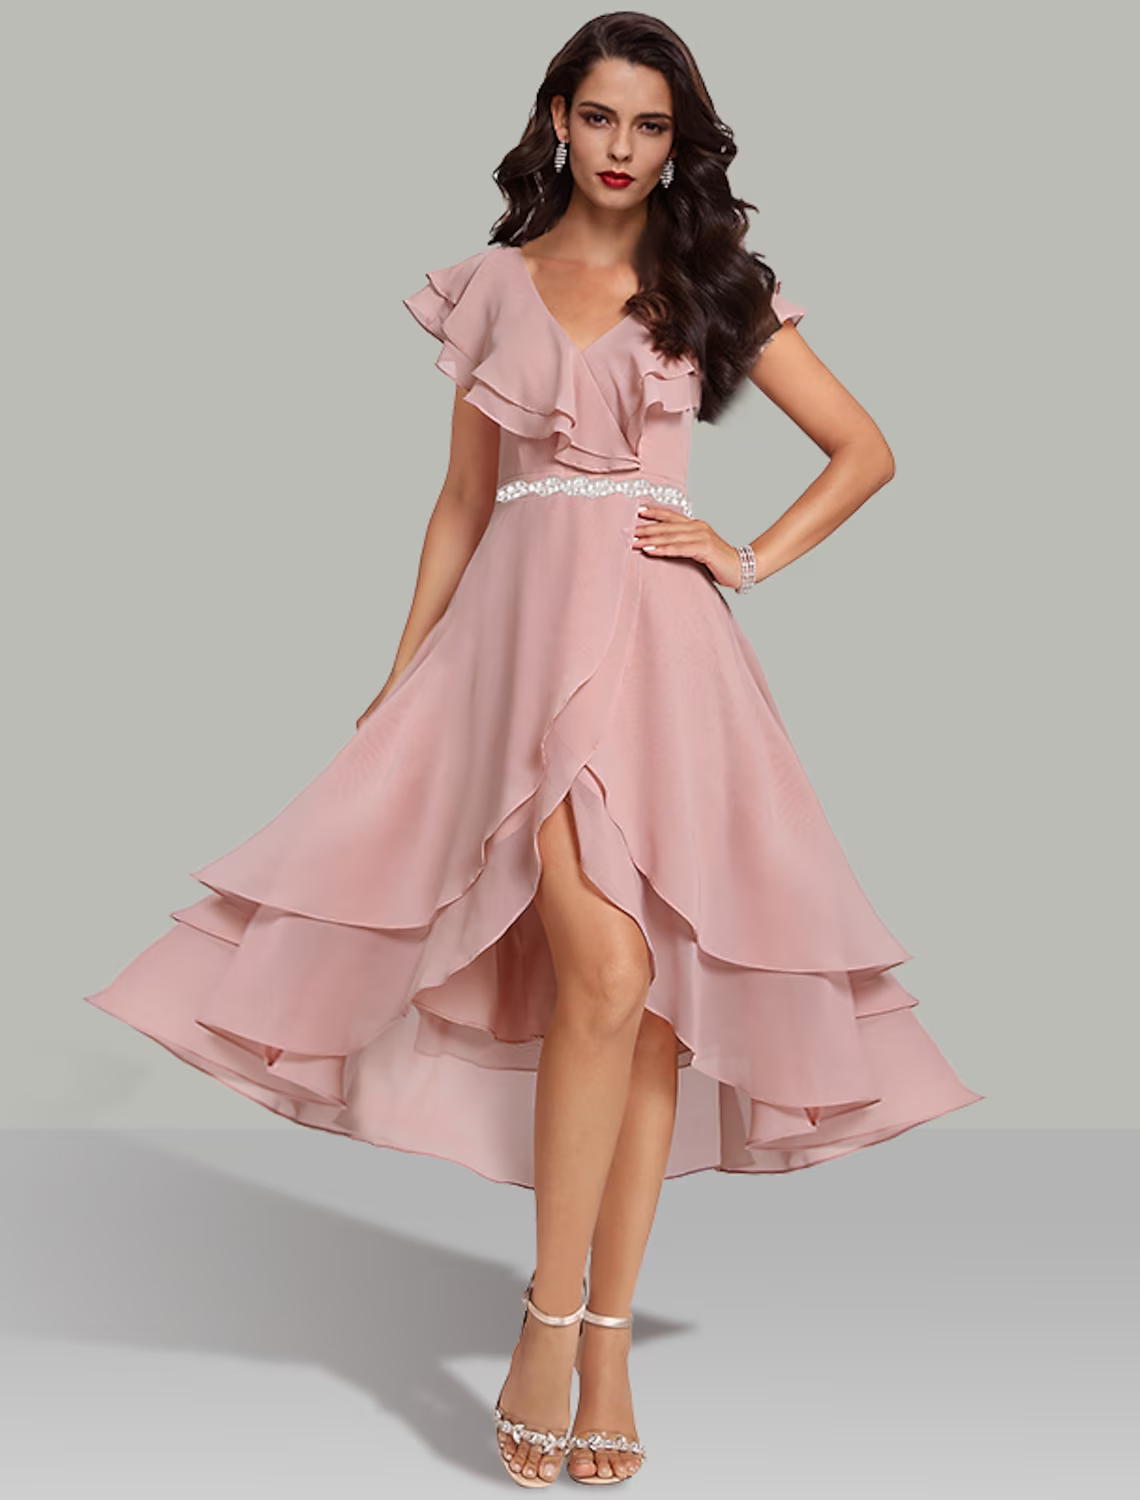 A-Line Wedding Guest Dresses Tiered Dress Cocktail Party Short Sleeve V Neck Belt Sash Chiffon with Beading